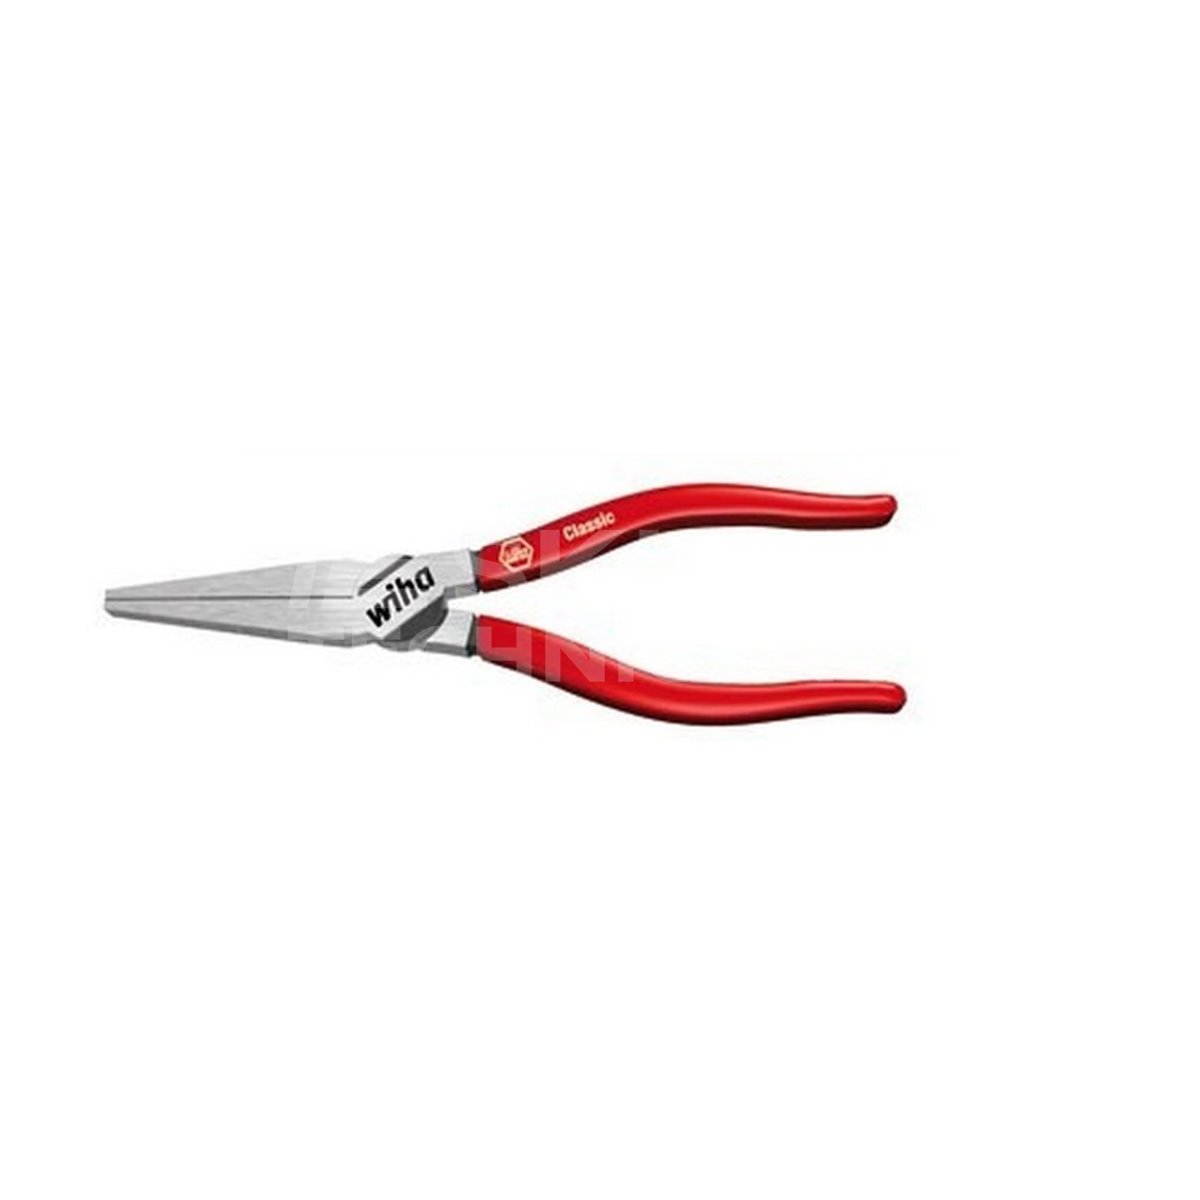 Flat-nose pliers with extended jaws Classic Z07016001 Wiha 26730.